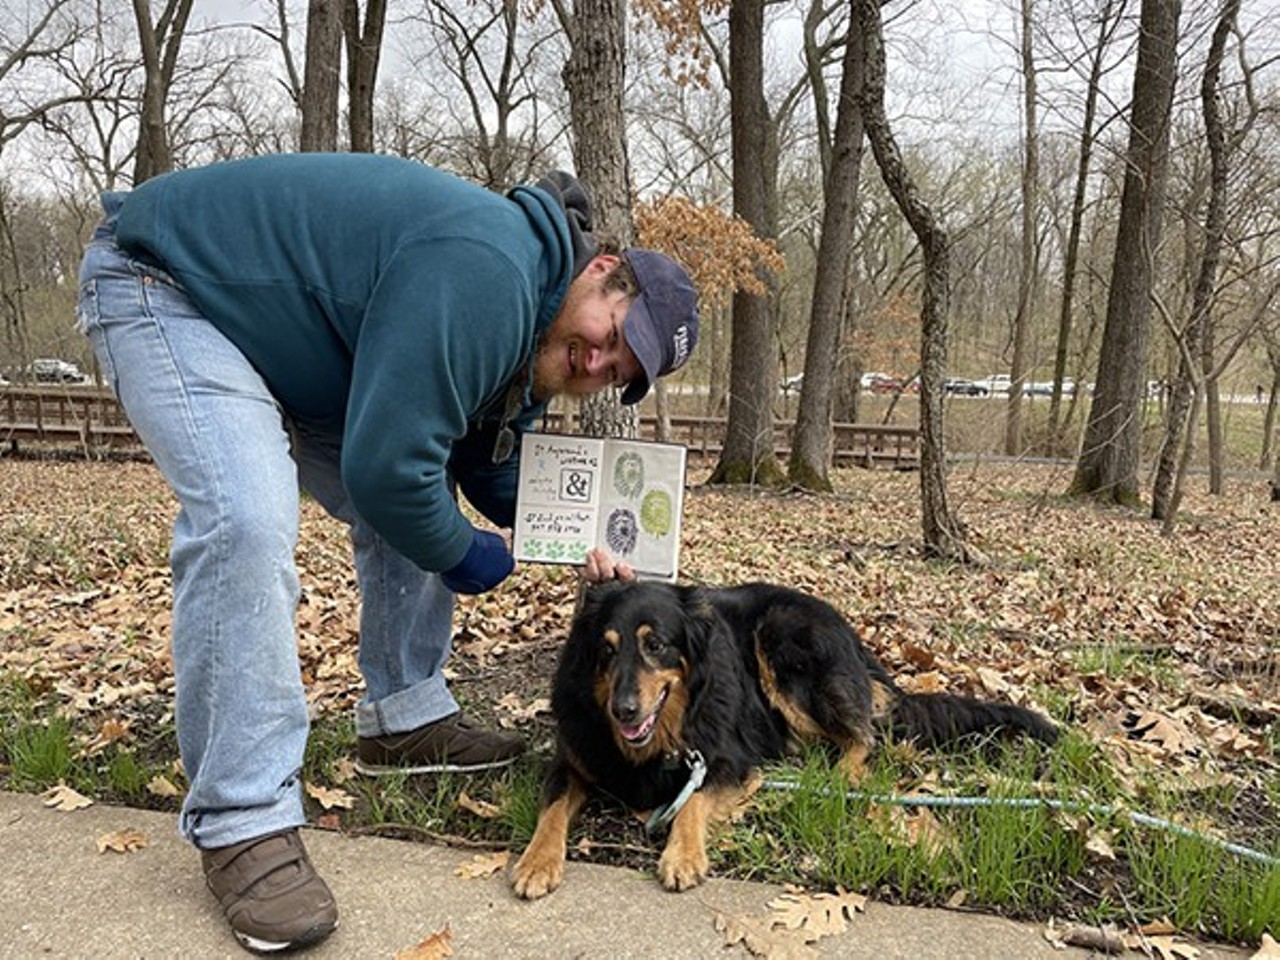 Get into geocaching and letterboxing around town
You&#146;ll never know where you will find magic out in nature. (Or where you'll find yourself in St. Louis while on your quest.
Find out more here.
Photo credit: Jack Killeen